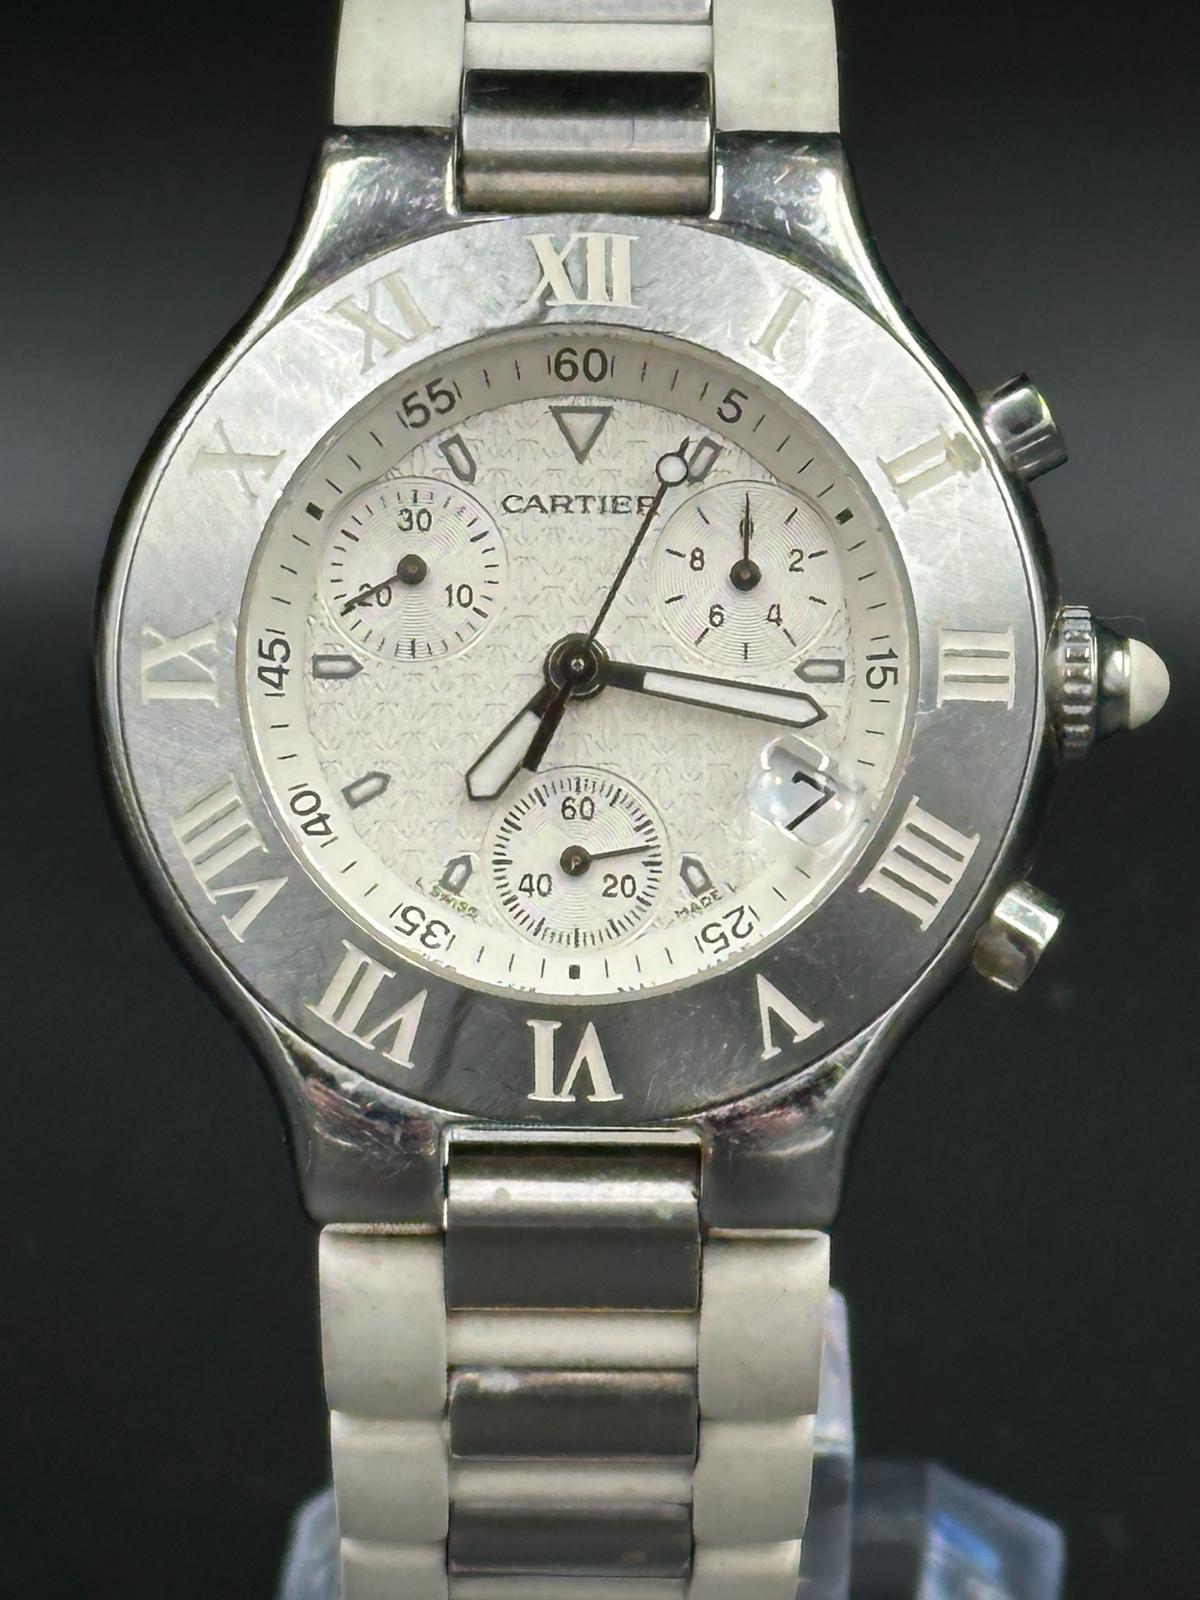 A Cartier Chronoscaph 21 Chronograph in white, stainless steel case, sapphire glass, white patterned - Image 5 of 5